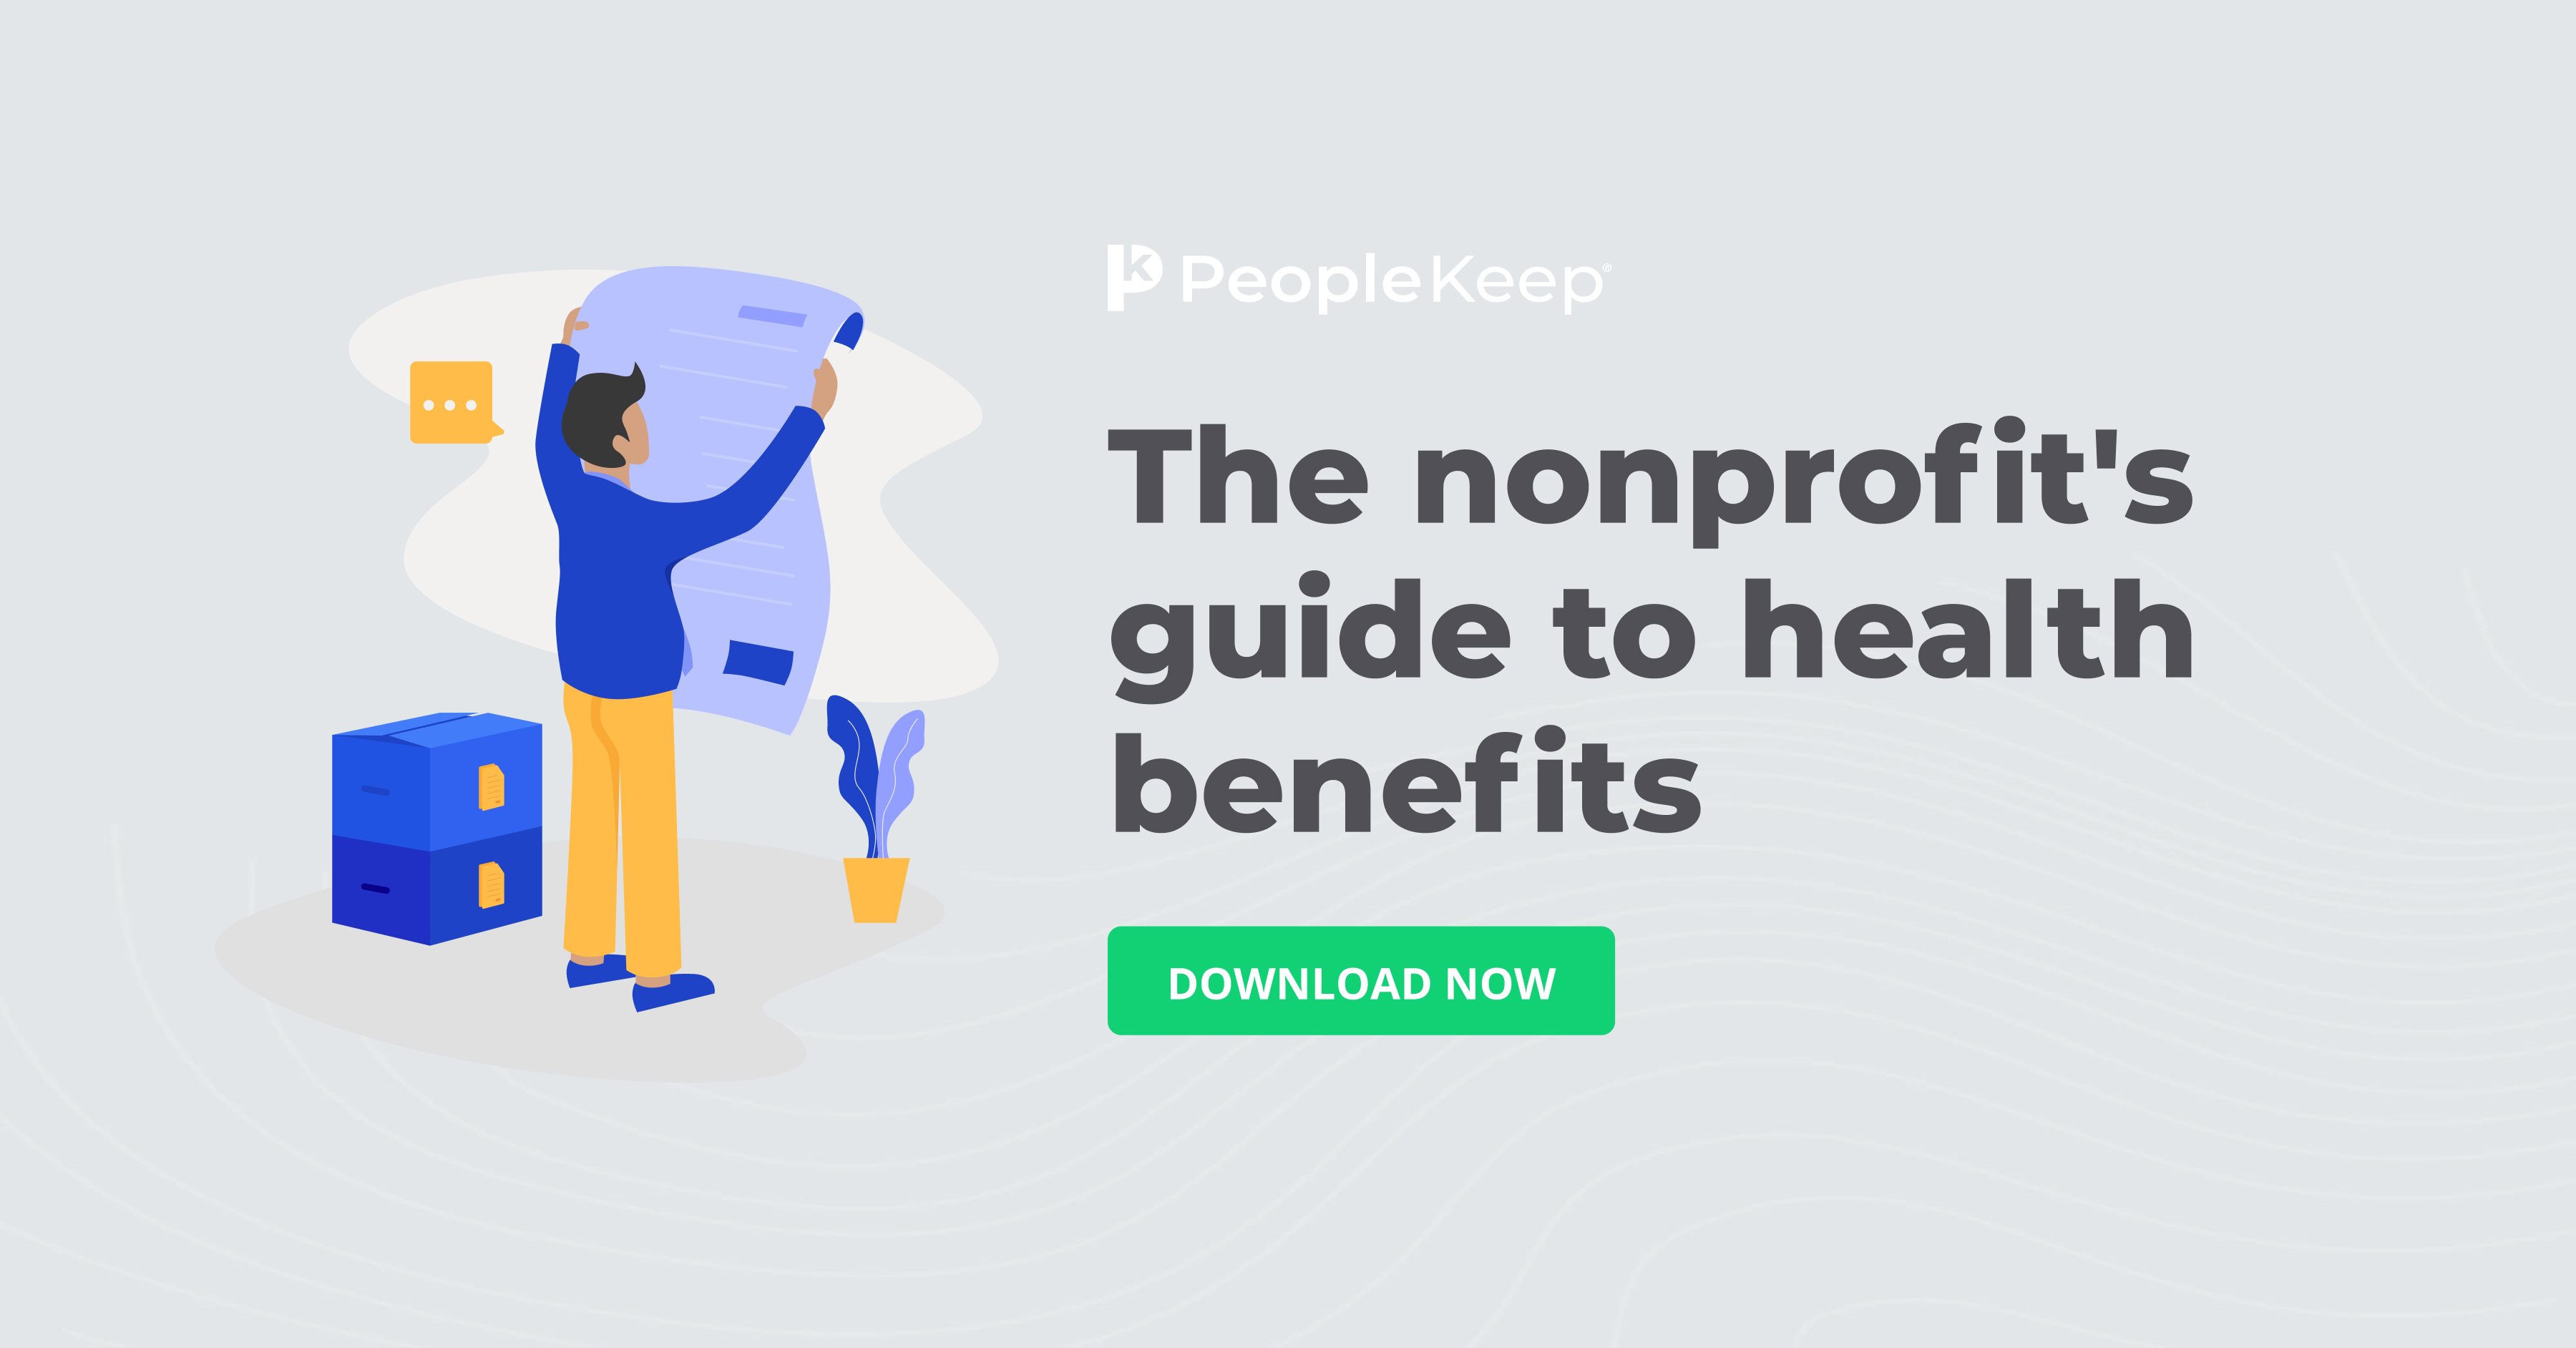 The nonprofits guide to health benefits